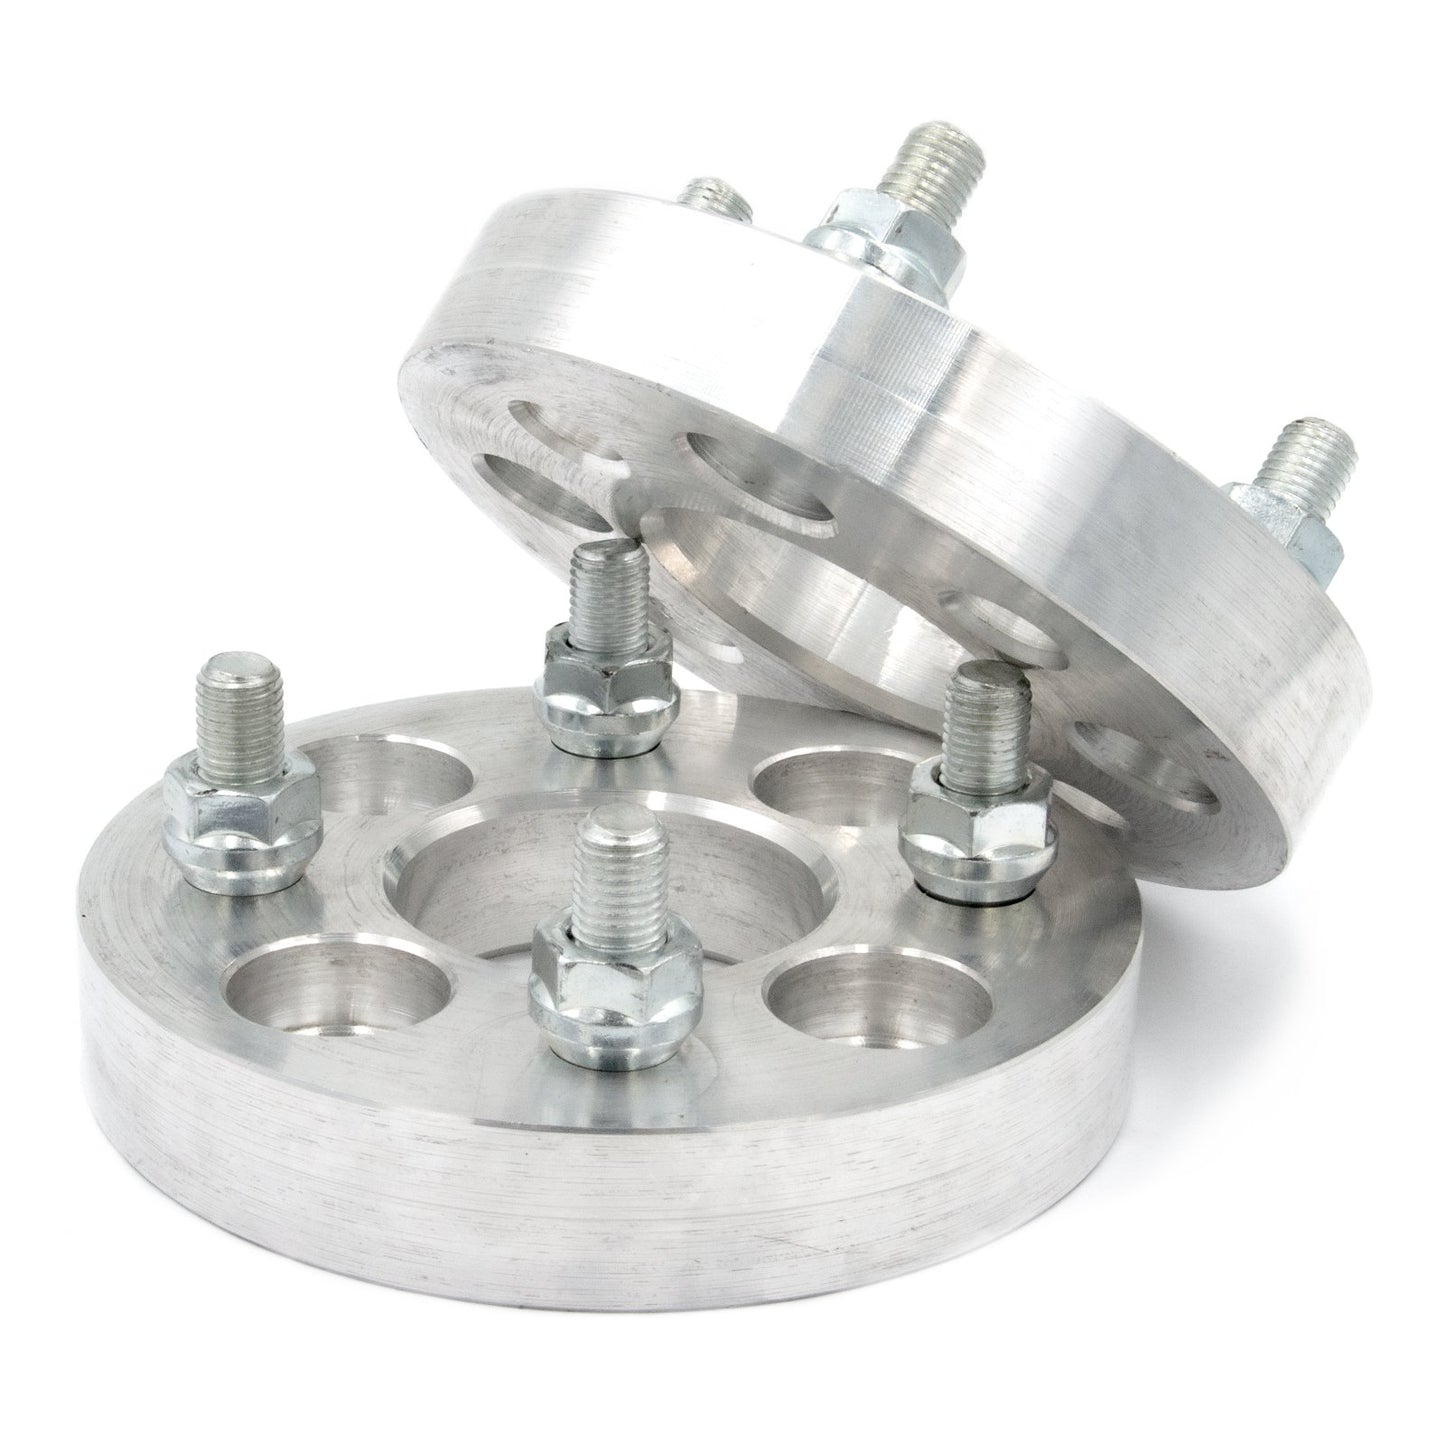 4x98 to 4x4.5" Wheel Spacer/Adapter - Thickness: 3/4"- 4"